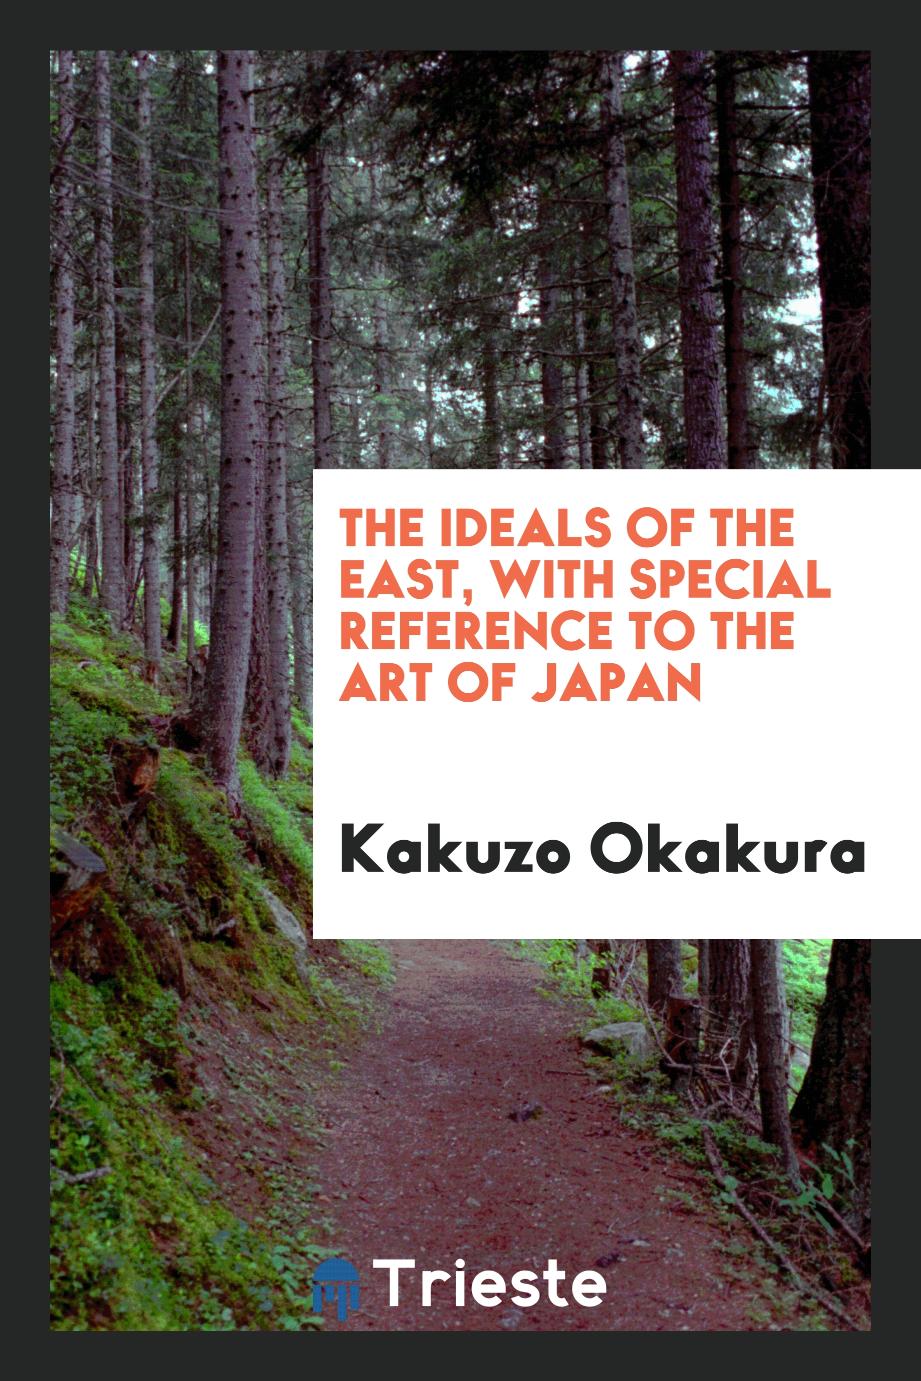 The ideals of the East, with special reference to the art of Japan